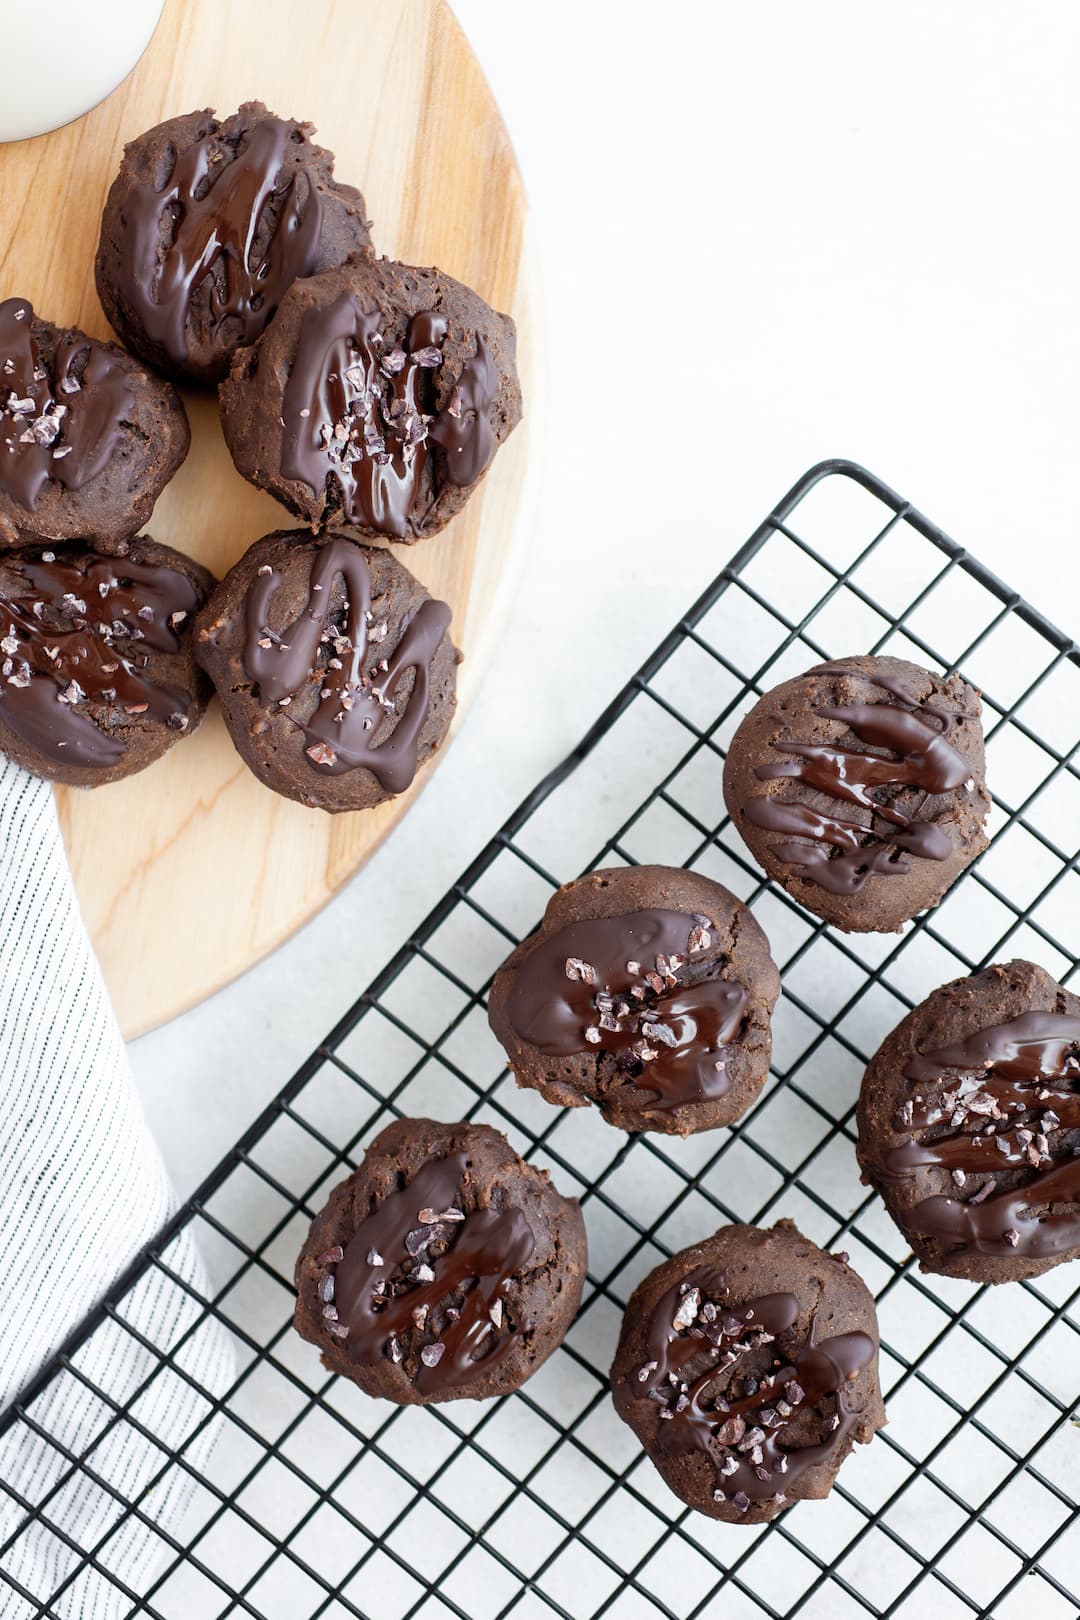 This easy and tasty recipe for healthy double chocolate cookies is super simple, dairy free, and has a gluten free option. Made with whole grains, cocoa powder, dark chocolate, and raw honey, they are a perfect sweet snack that’s soft, pillowy, chewy and low calorie. 